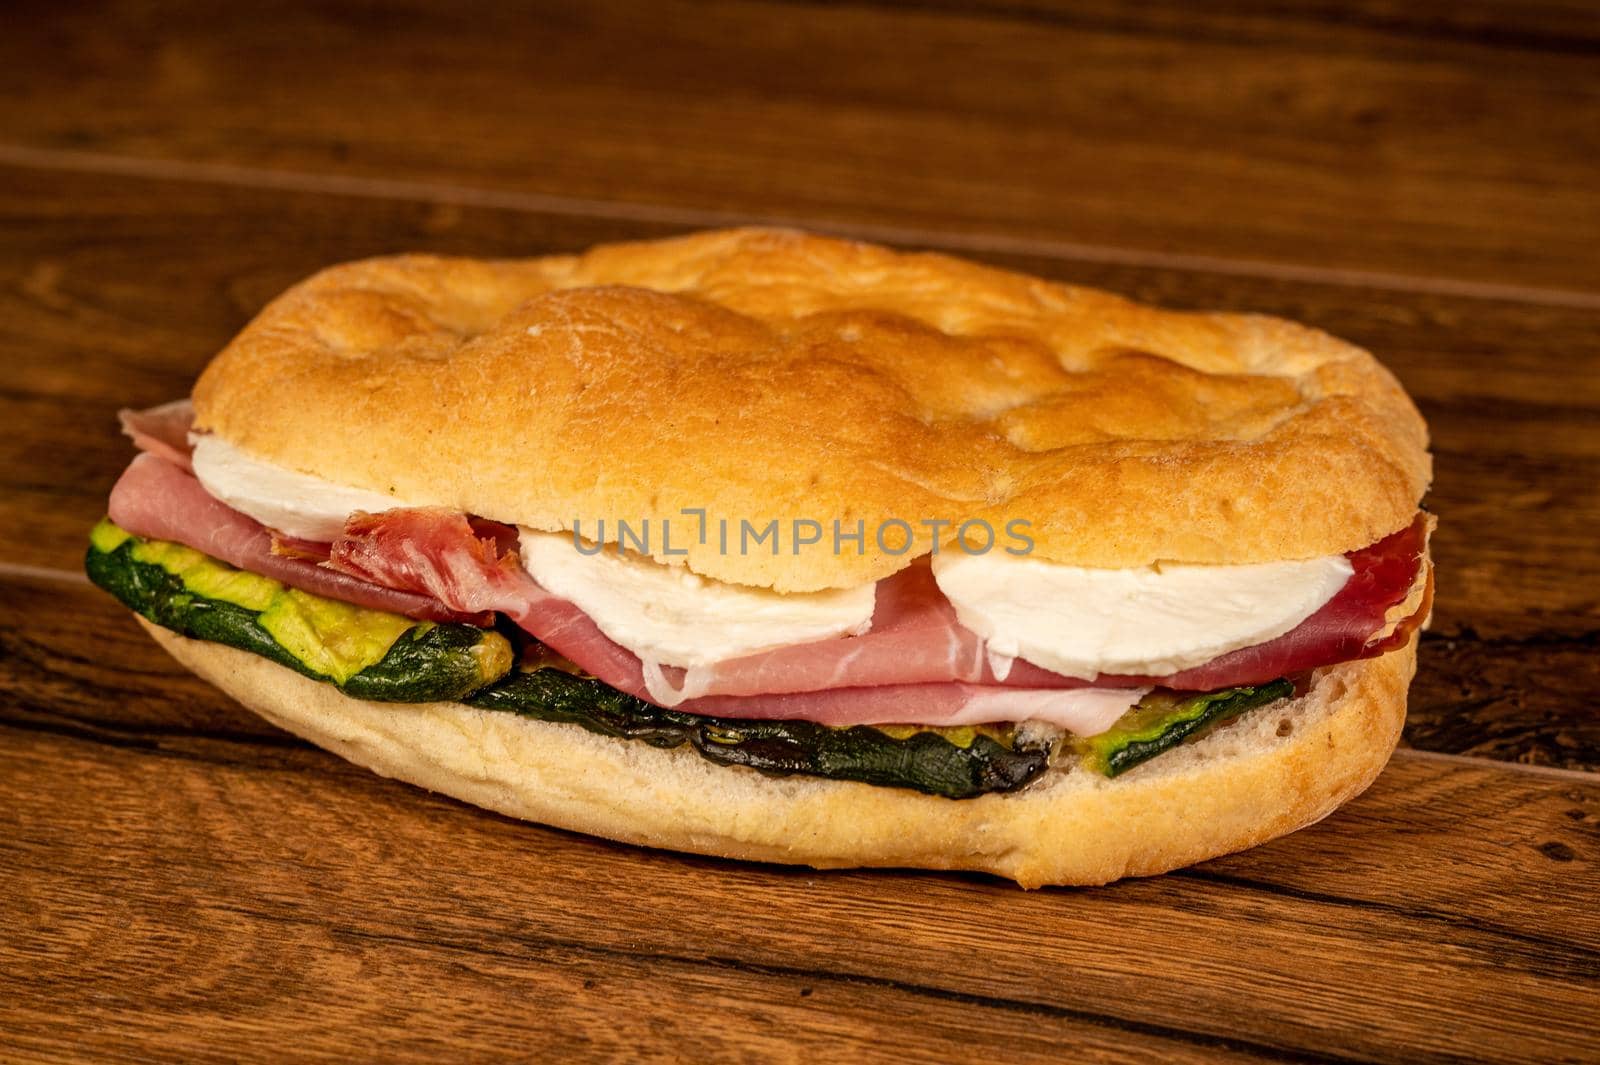 stuffed focaccia with cold cuts and vegetables by carfedeph